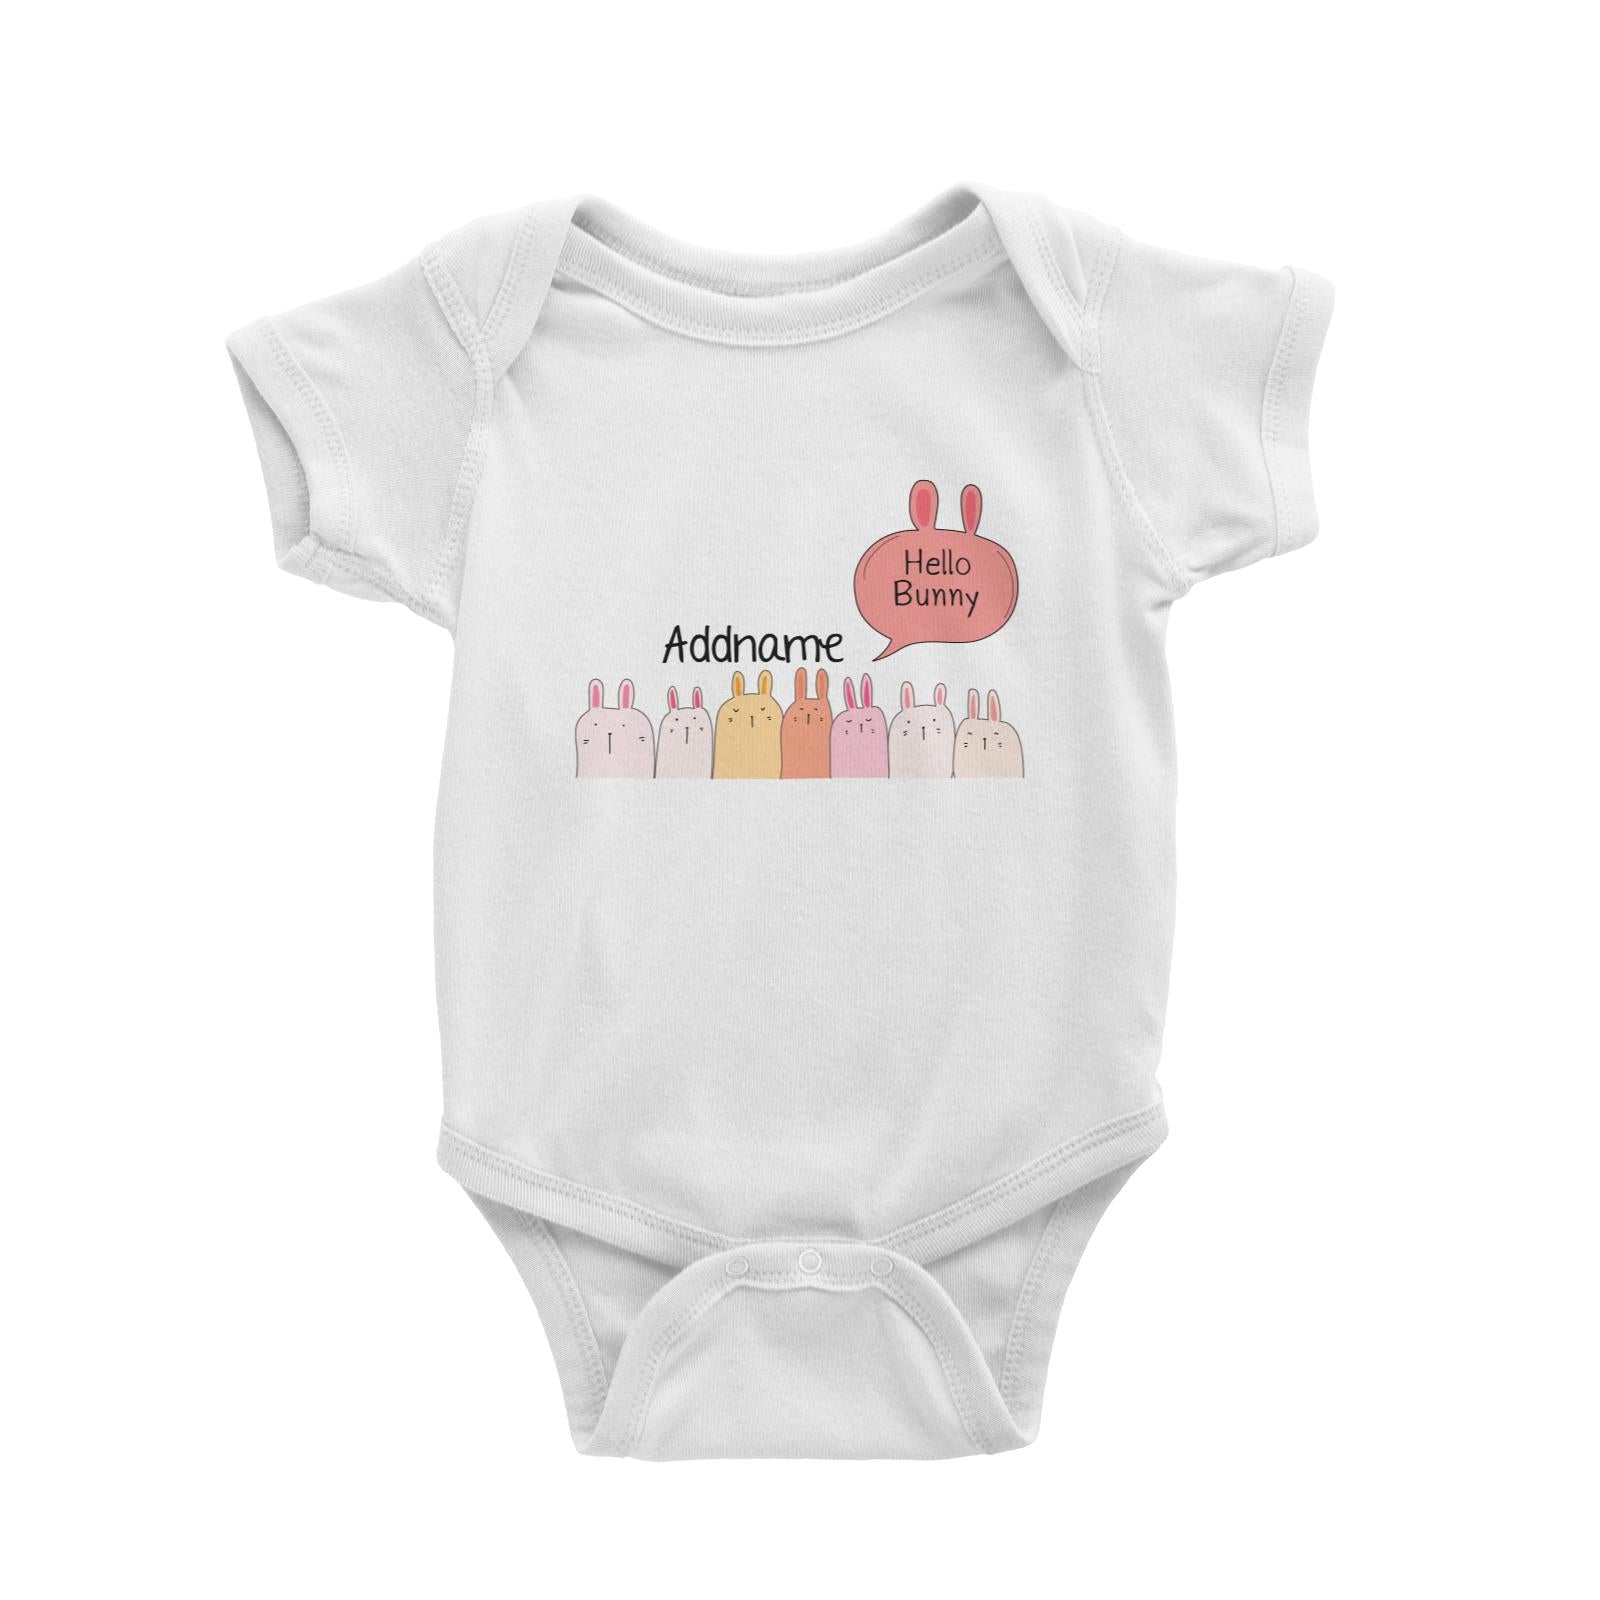 Cute Animals And Friends Series Hello Bunny Group Addname Baby Romper